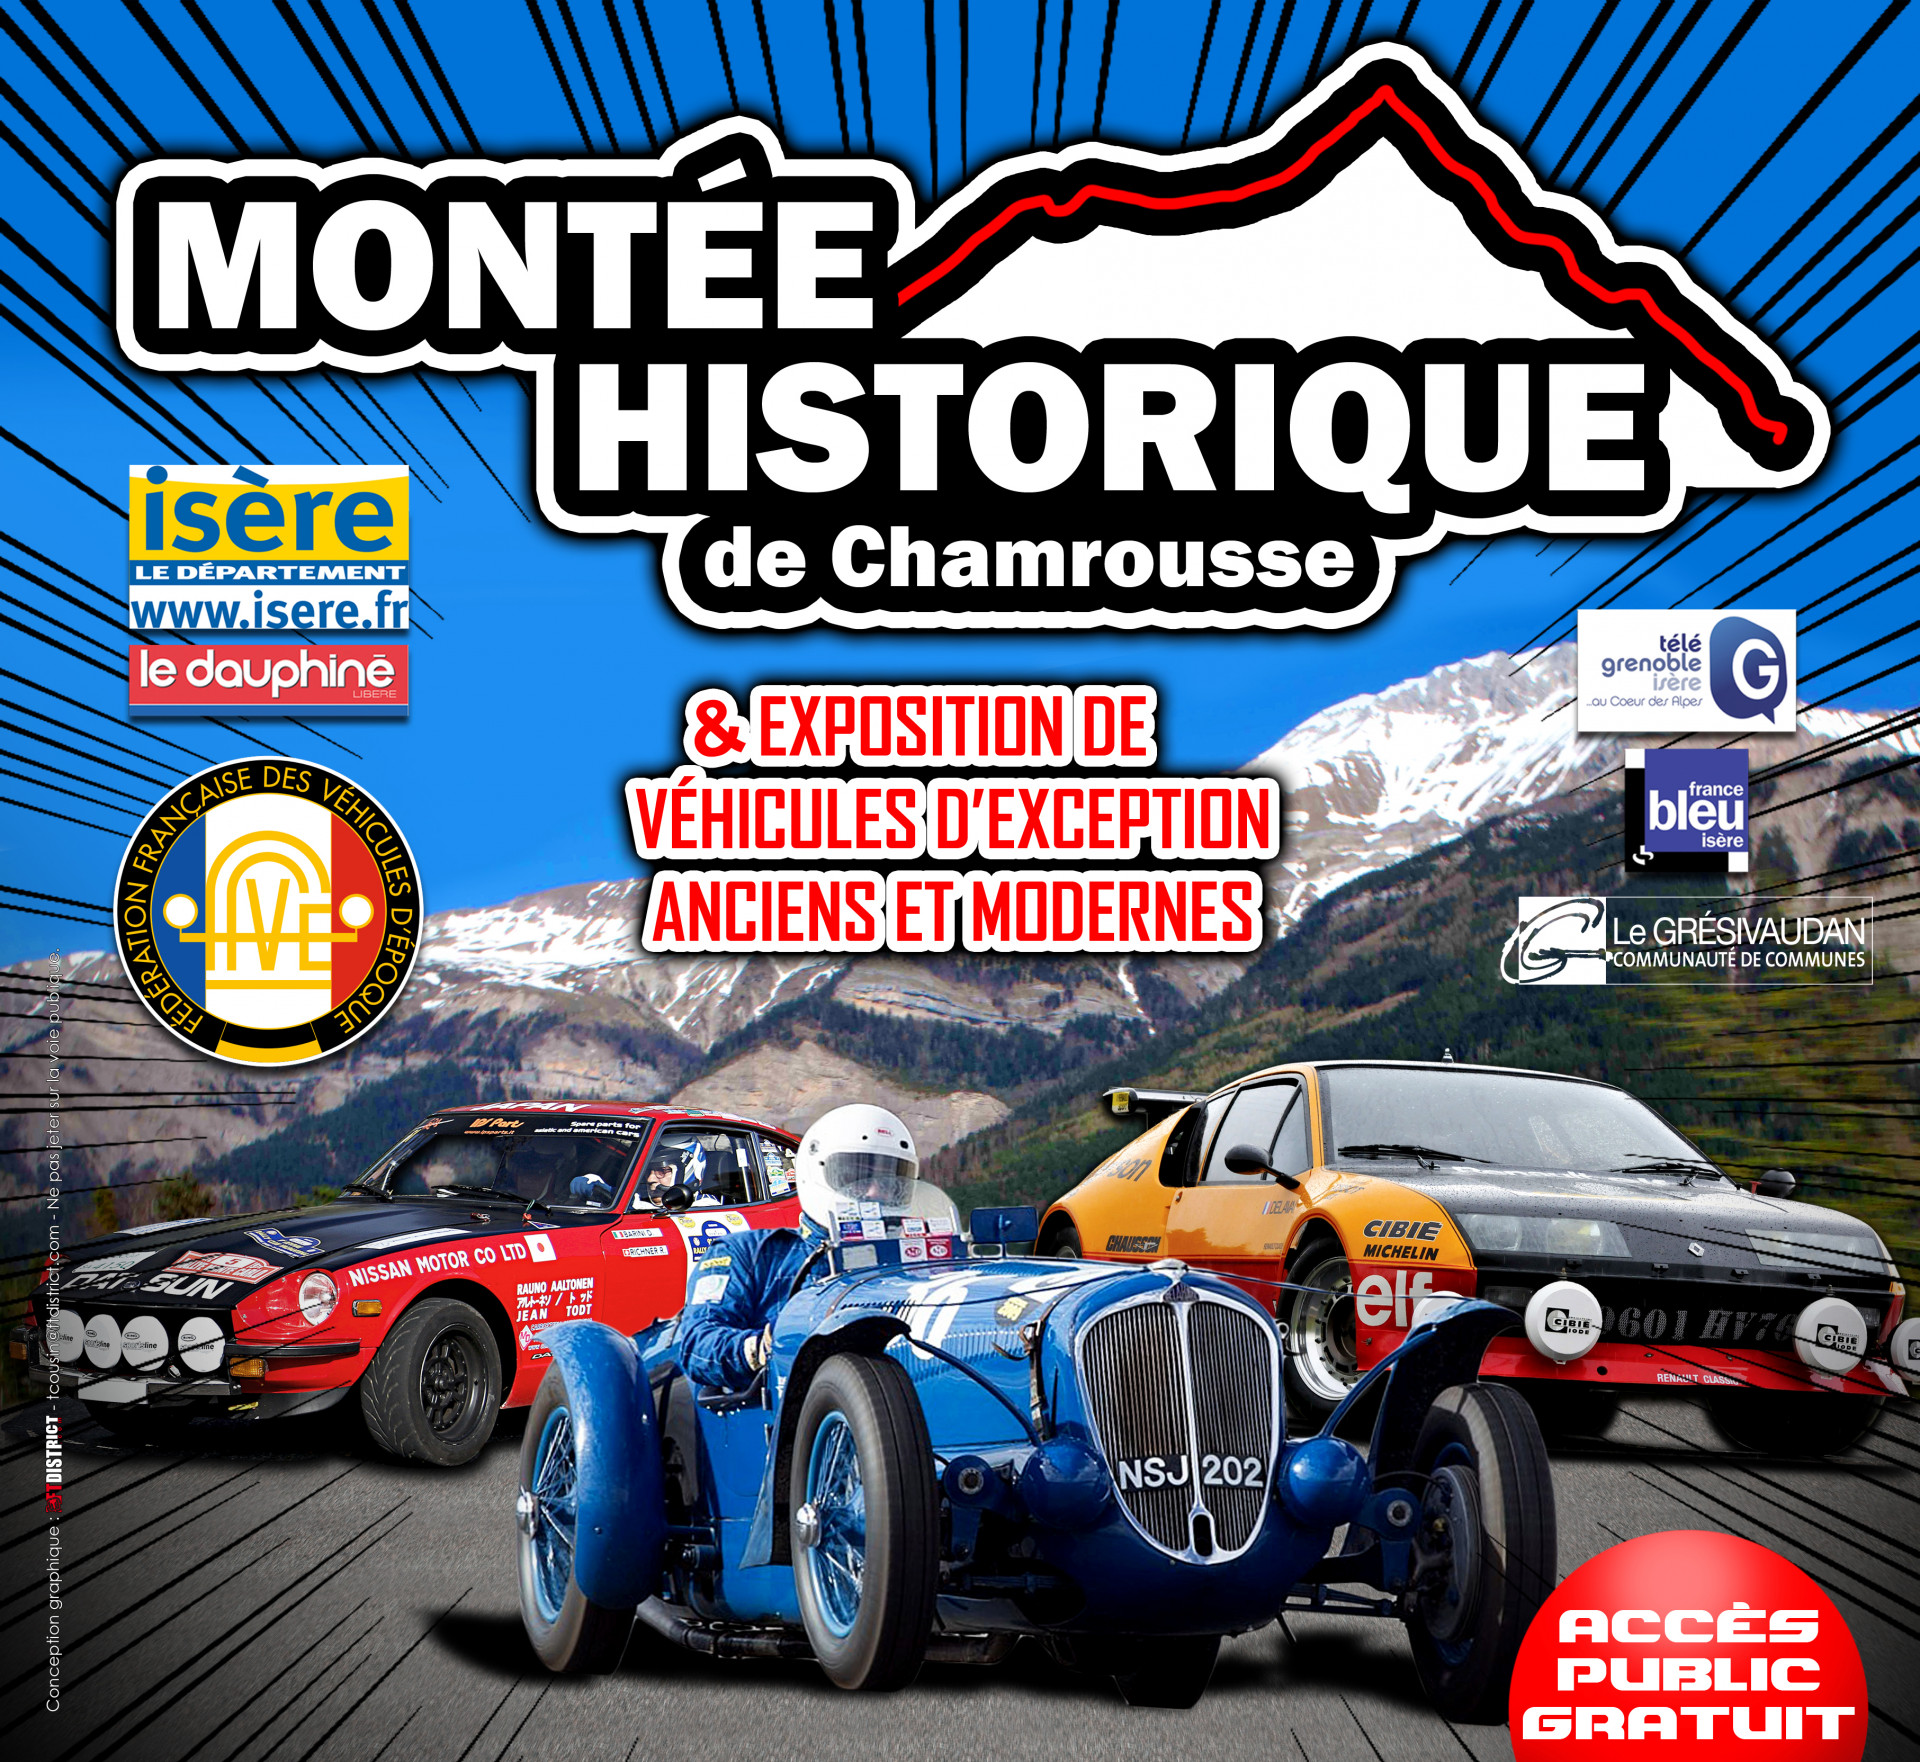 Historical ascent of Chamrousse